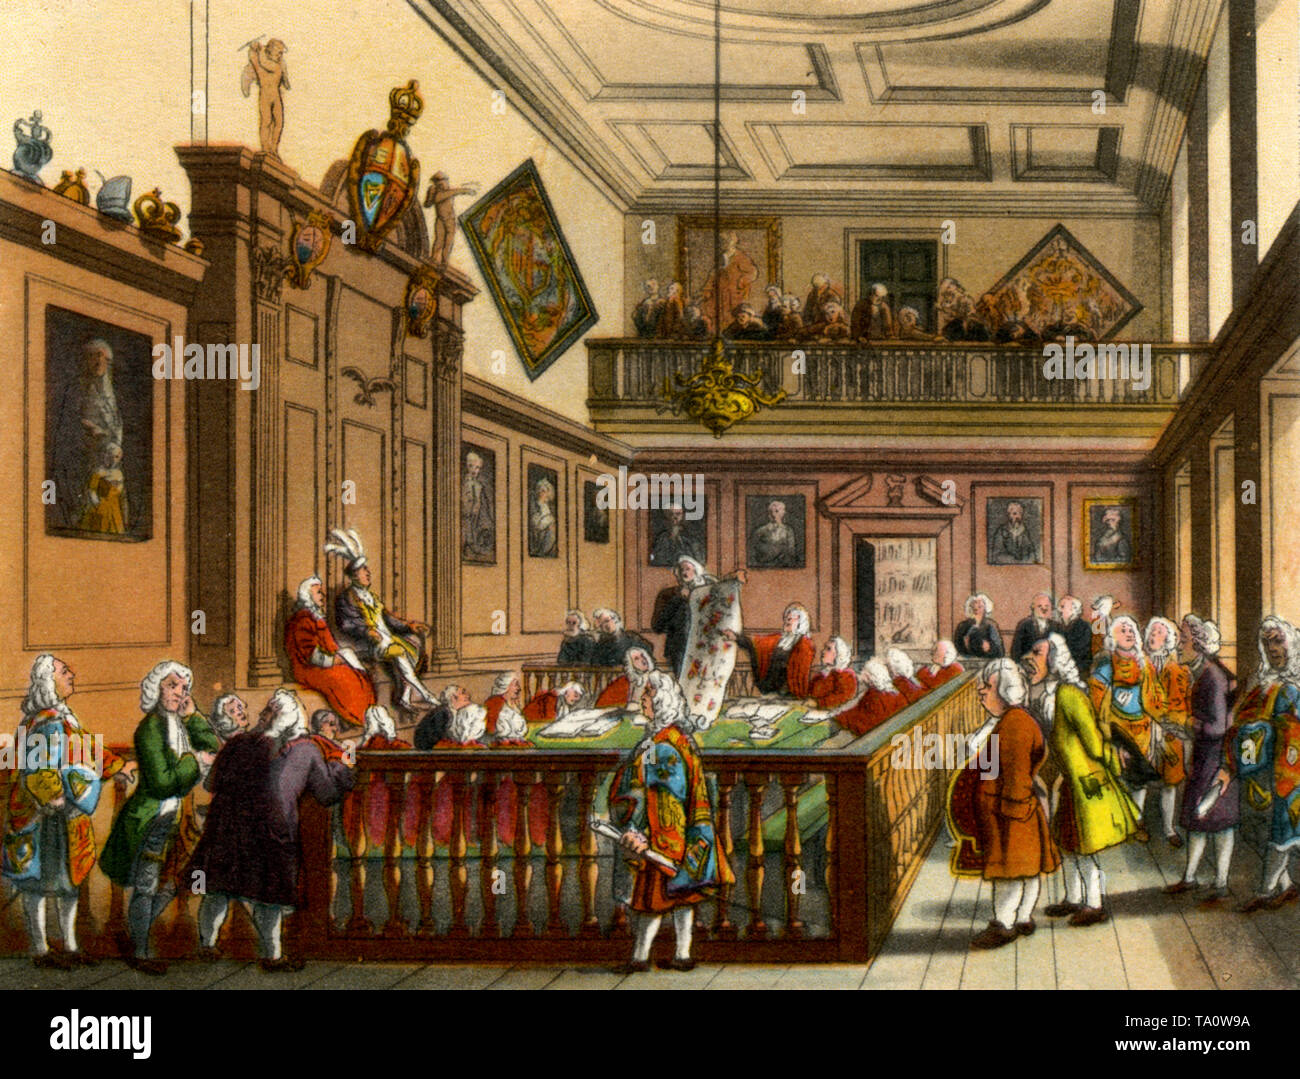 The College of Arms, c1808-1810. A print from 'The Microcosm of London'. A print from 'The Microcosm of London', by William Henry Pyne (1770-1843). Illustrated by Thomas Rowlandson (1756-1827) and Auguste Charles Pugin (1762-1832). The Earl Marshall's Court, College of Arms. The College of Arms is responsible for issuing and regulating heraldic coats of arms to individuals, families and institutions. The original building was destroyed in the Great Fire in 1666 and rebuilt in 1671-8. Stock Photo